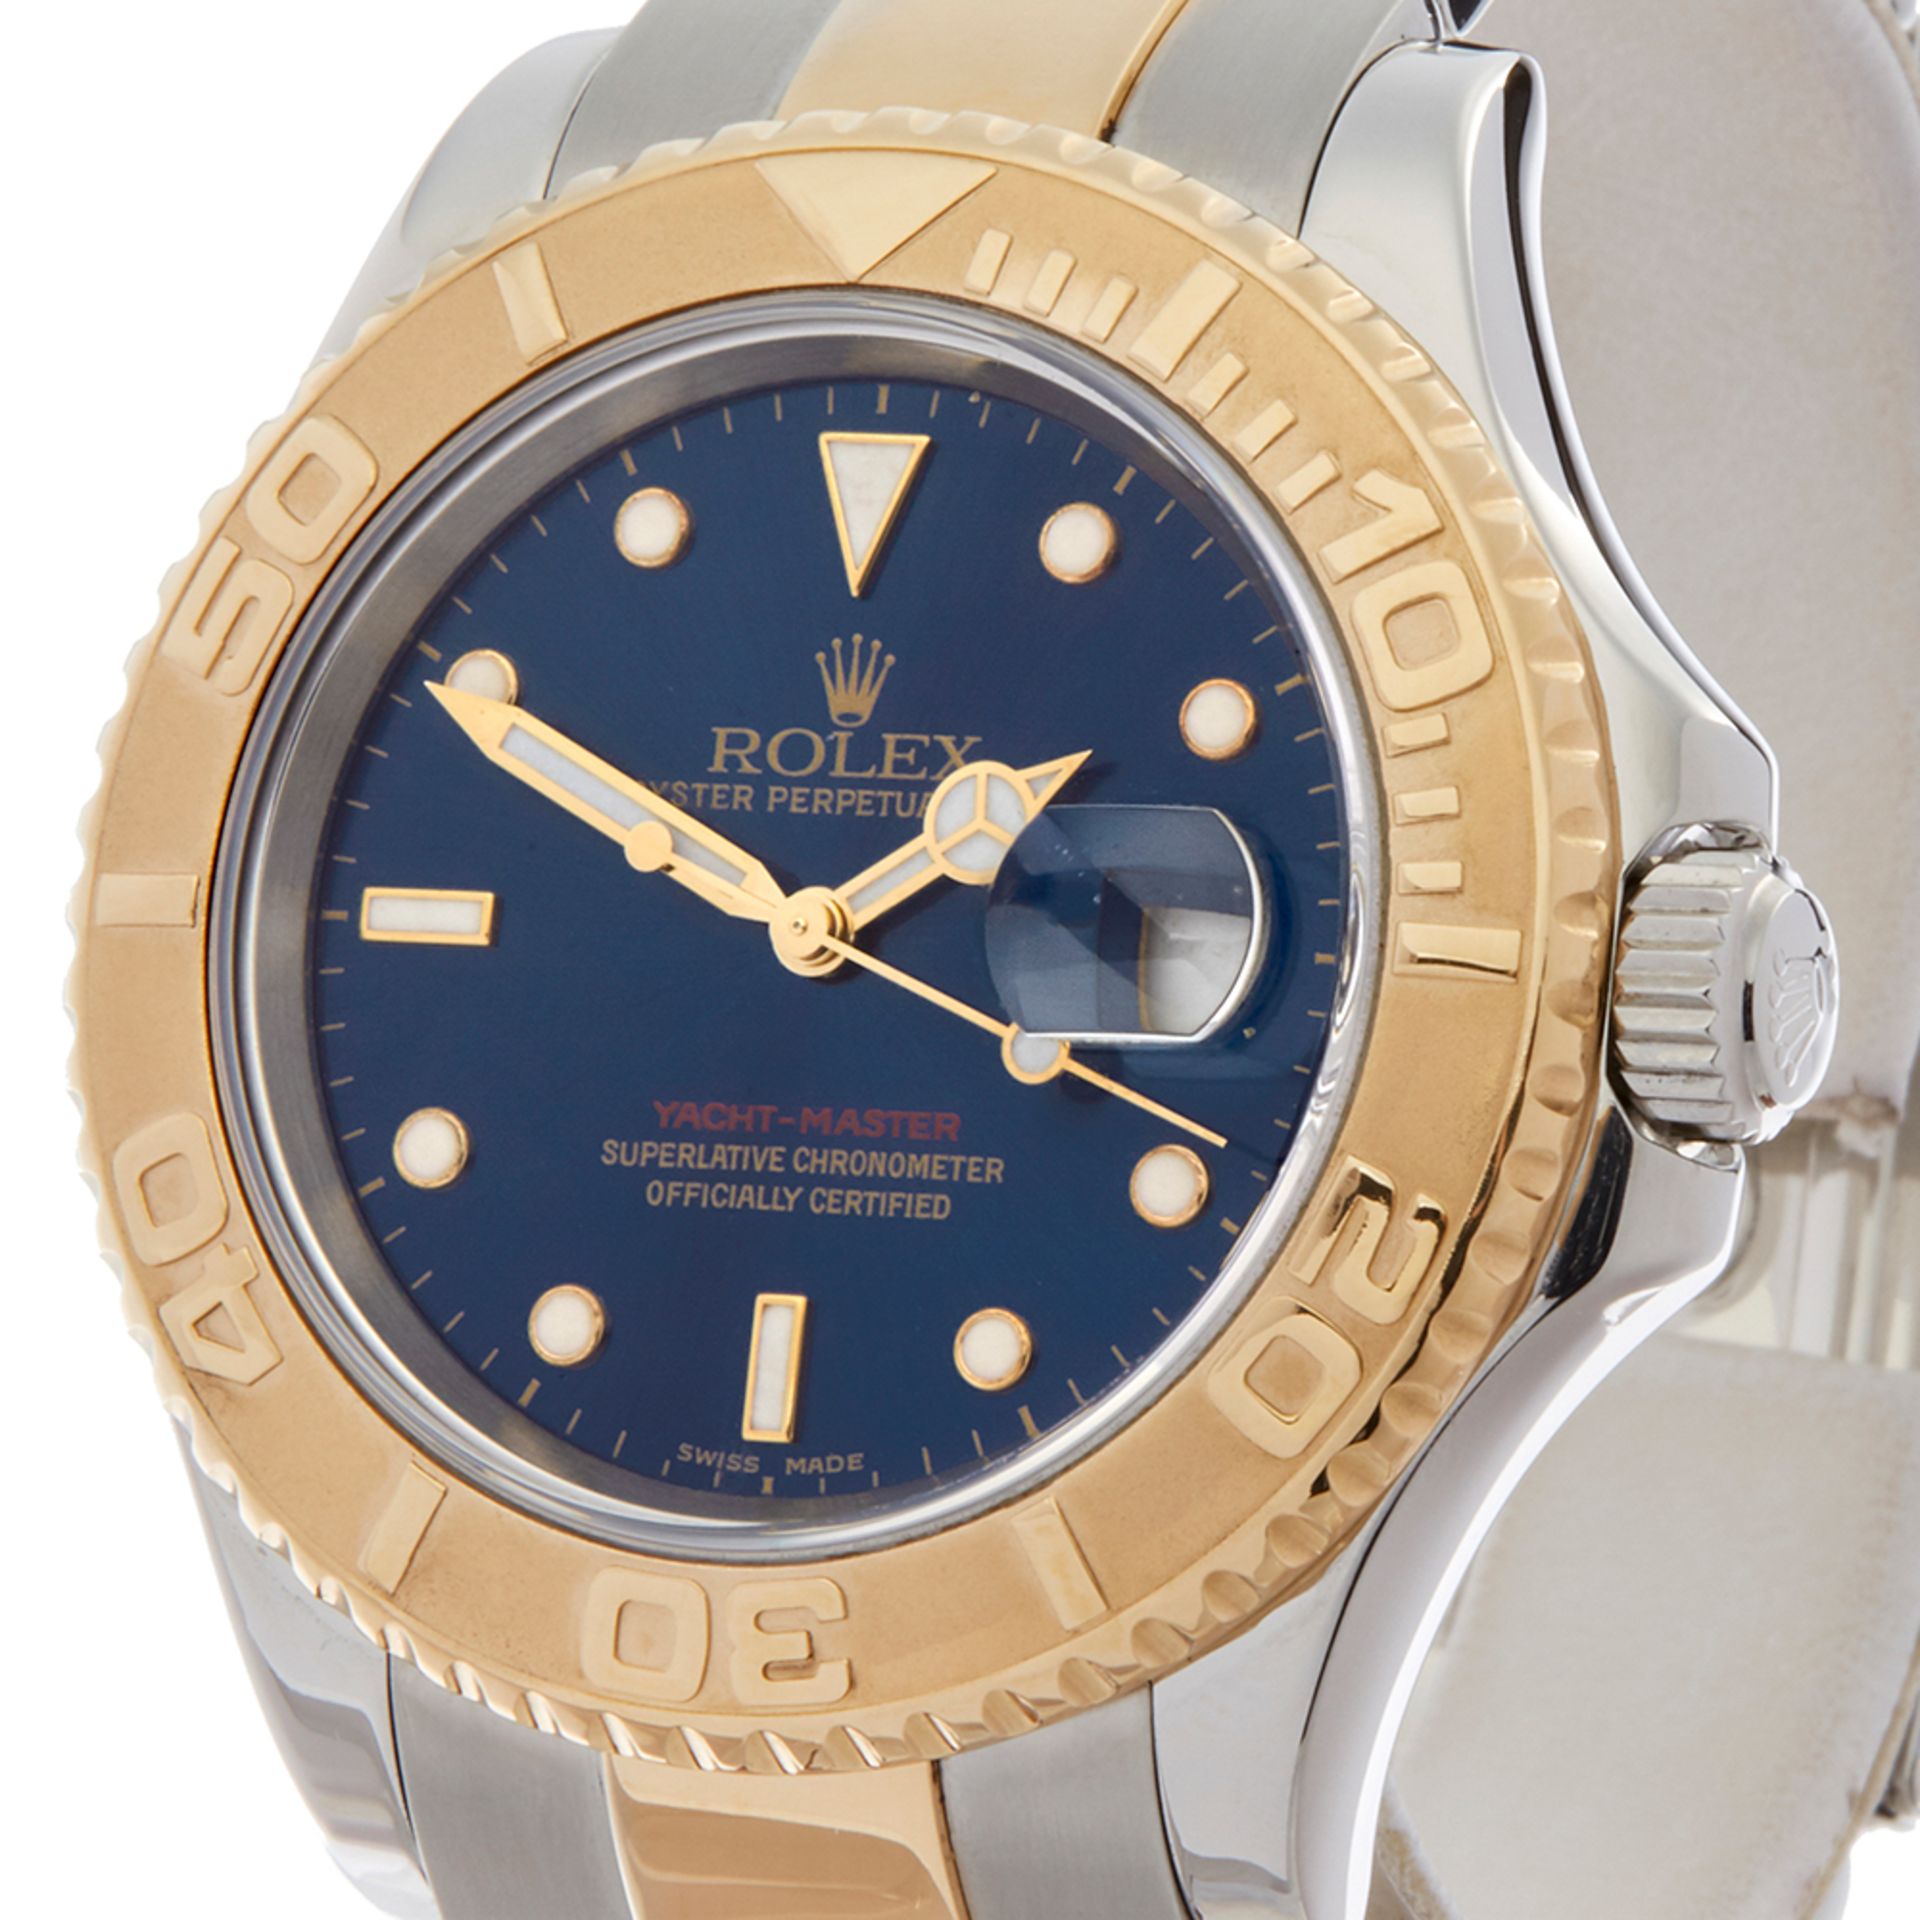 Rolex Yacht-Master Stainless Steel & 18k Yellow Gold - 16623